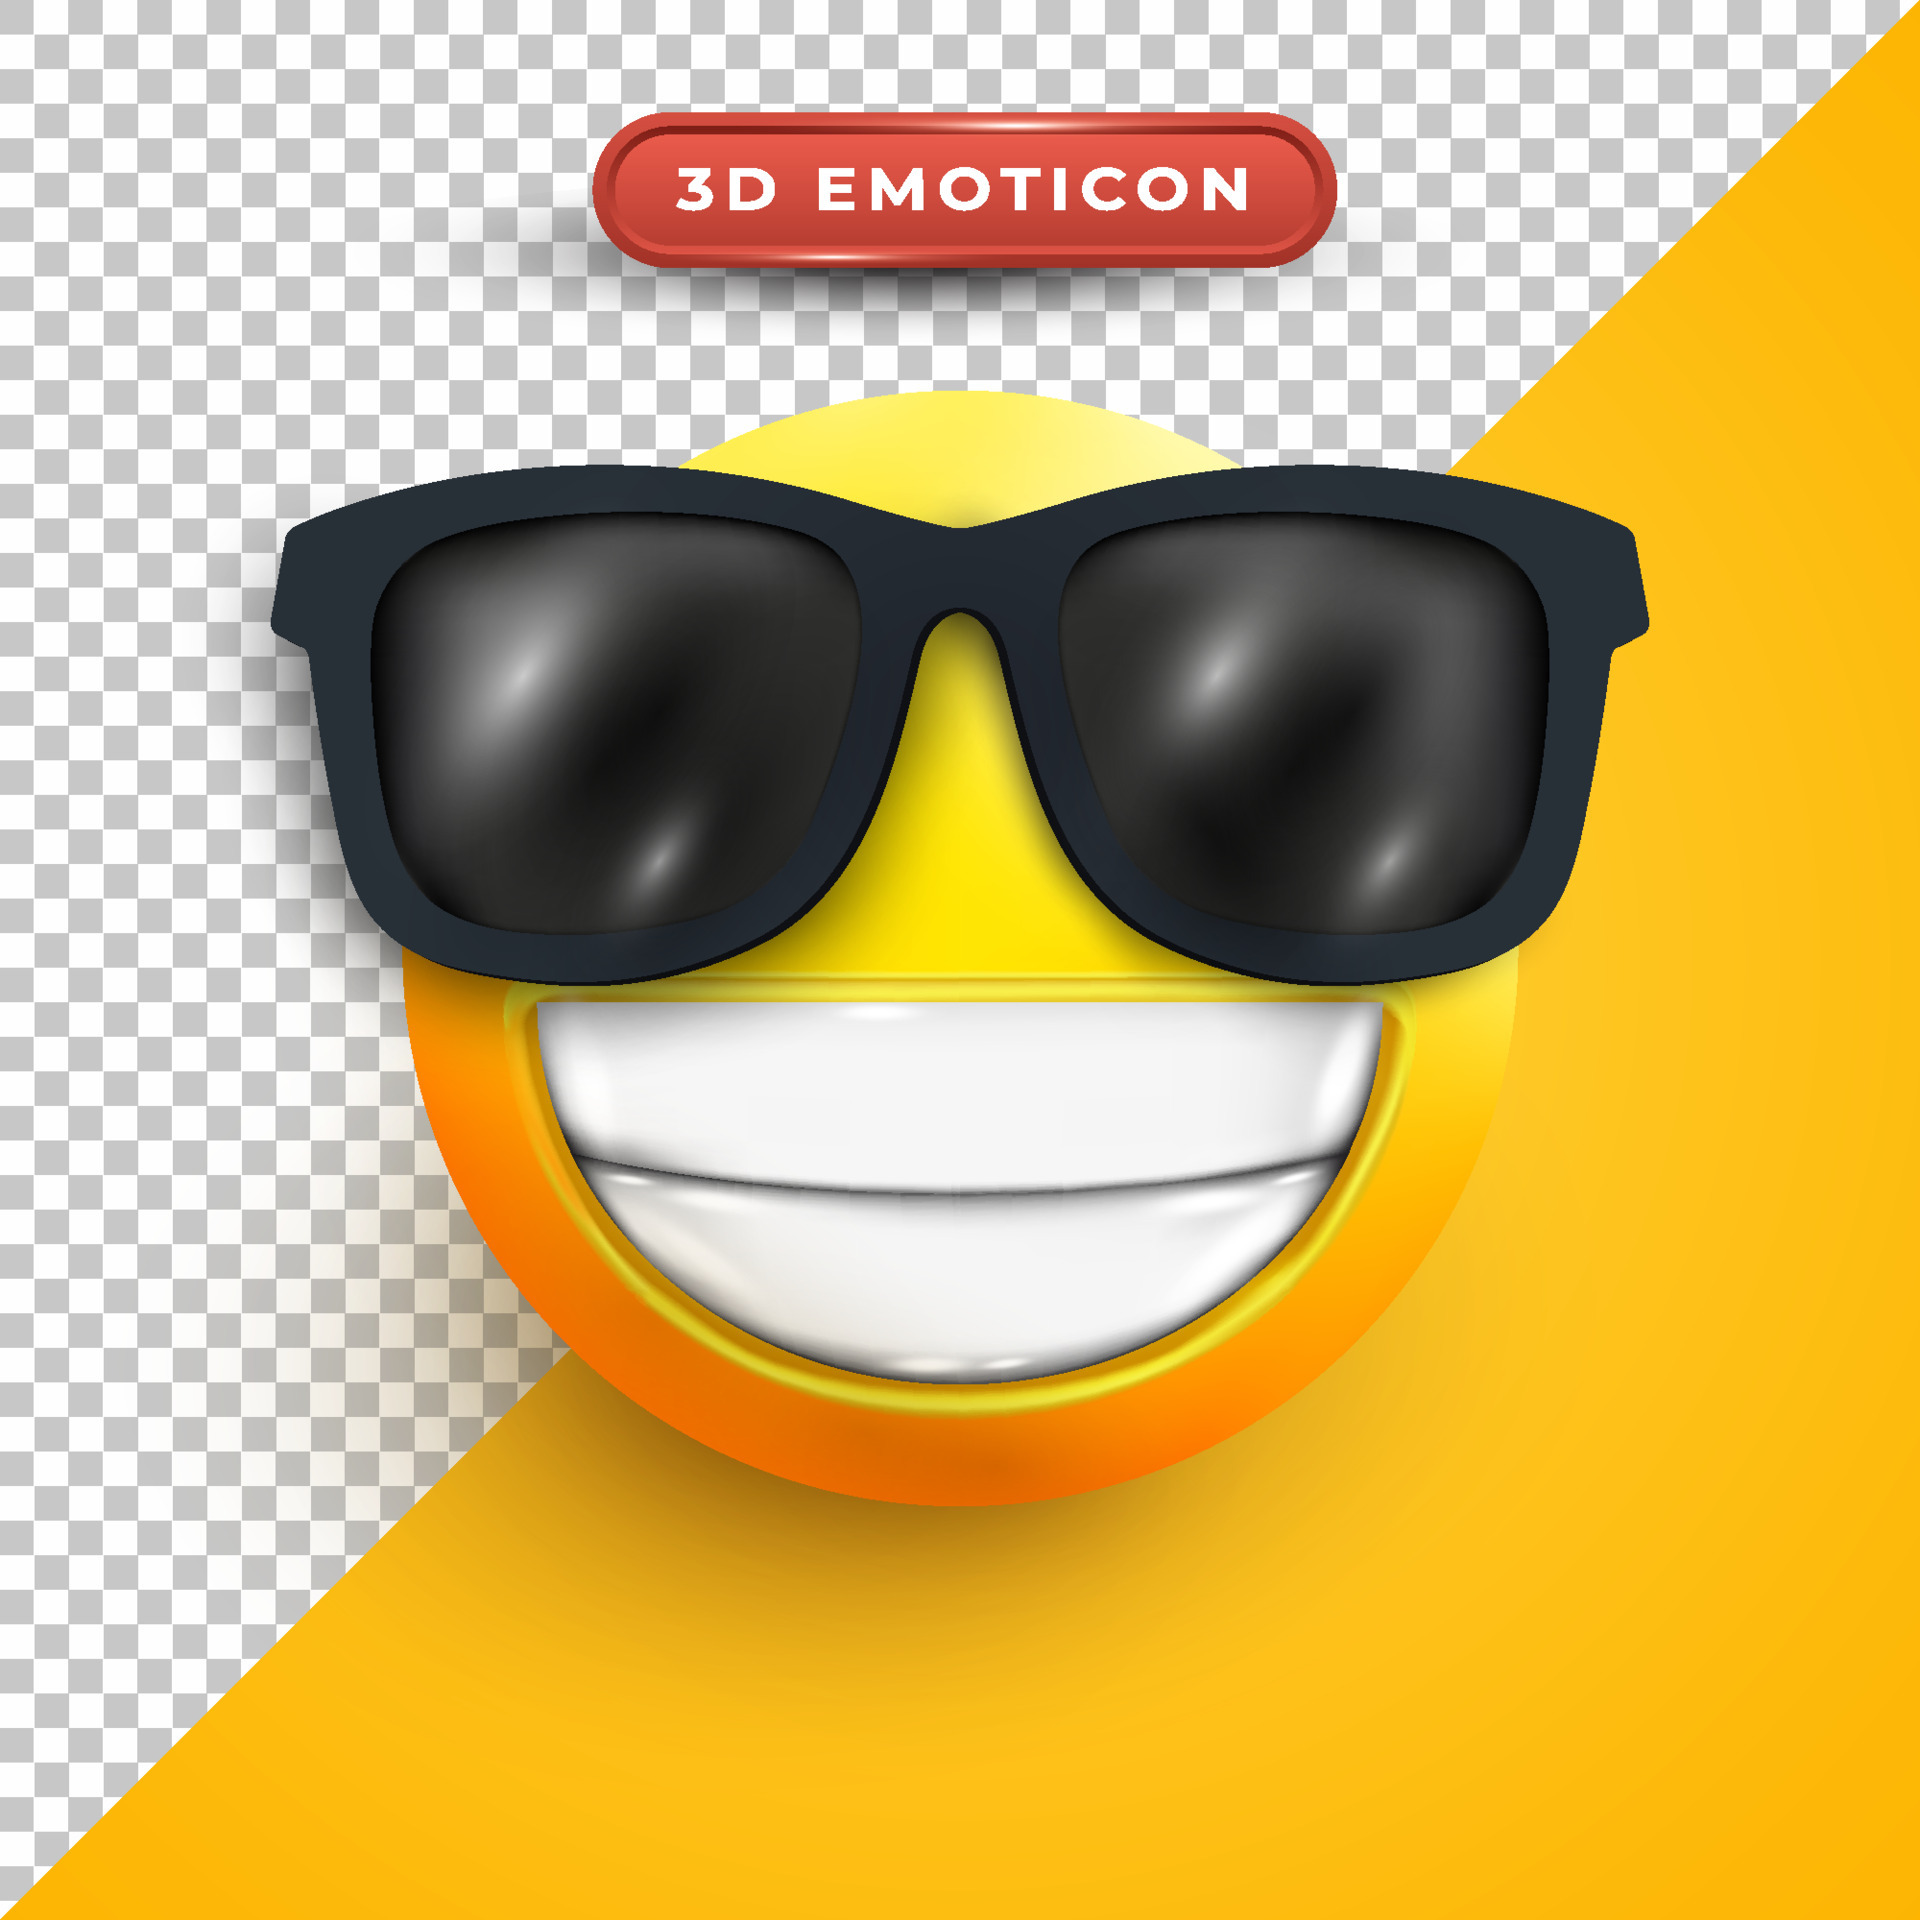 1,051 Awesome Emoji Images, Stock Photos, 3D objects, & Vectors